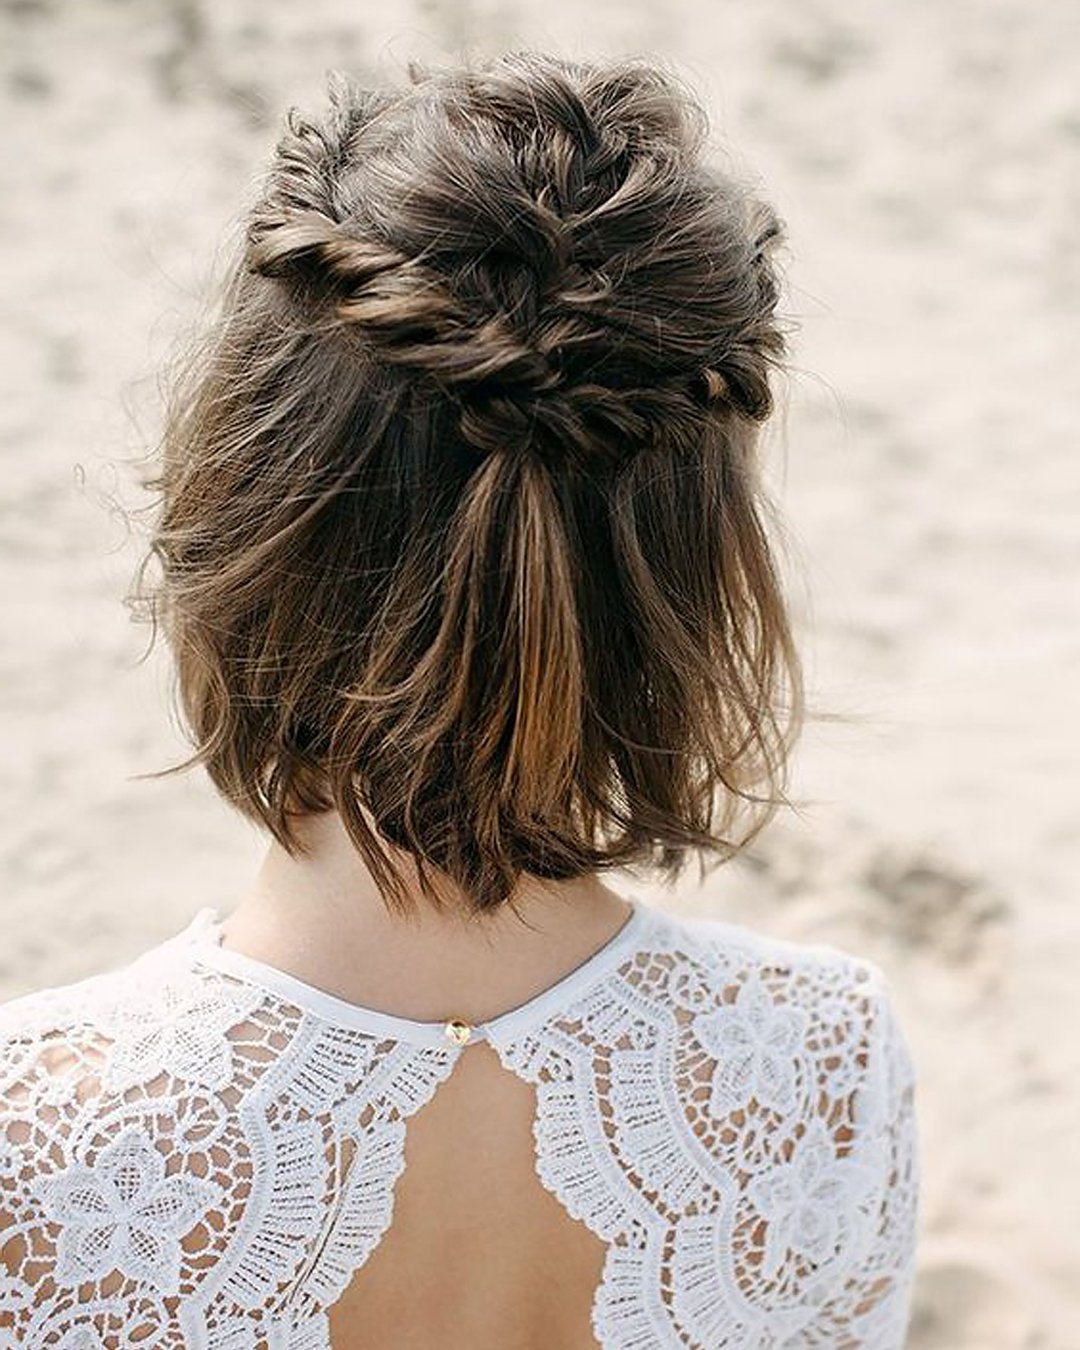 10 of the best wedding guest hairstyles :: Wedding hairstyles ::  allaboutyou.com